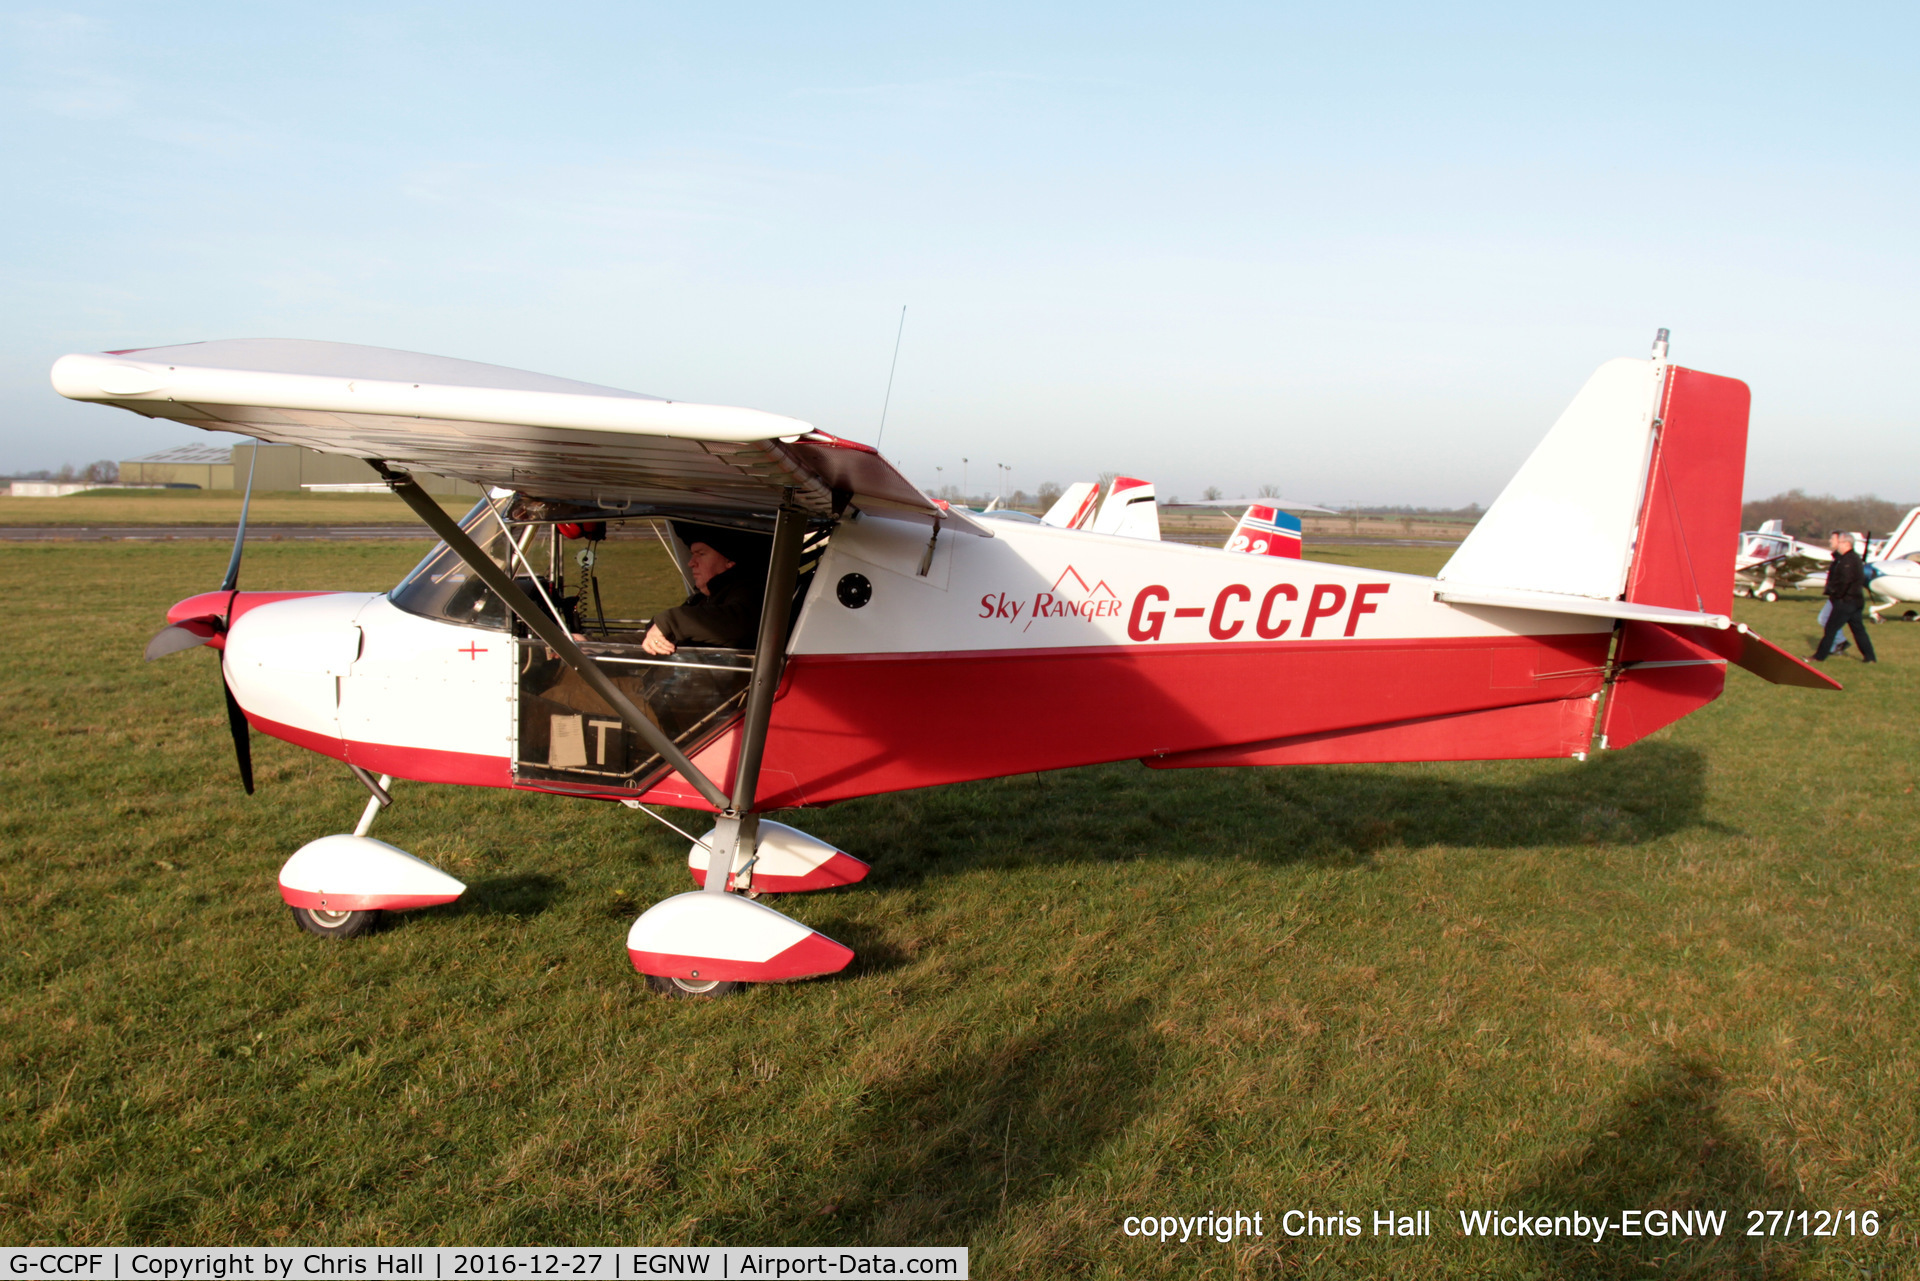 G-CCPF, 2004 Best Off Skyranger 912(2) C/N BMAA/HB/340, at the Wickenby 